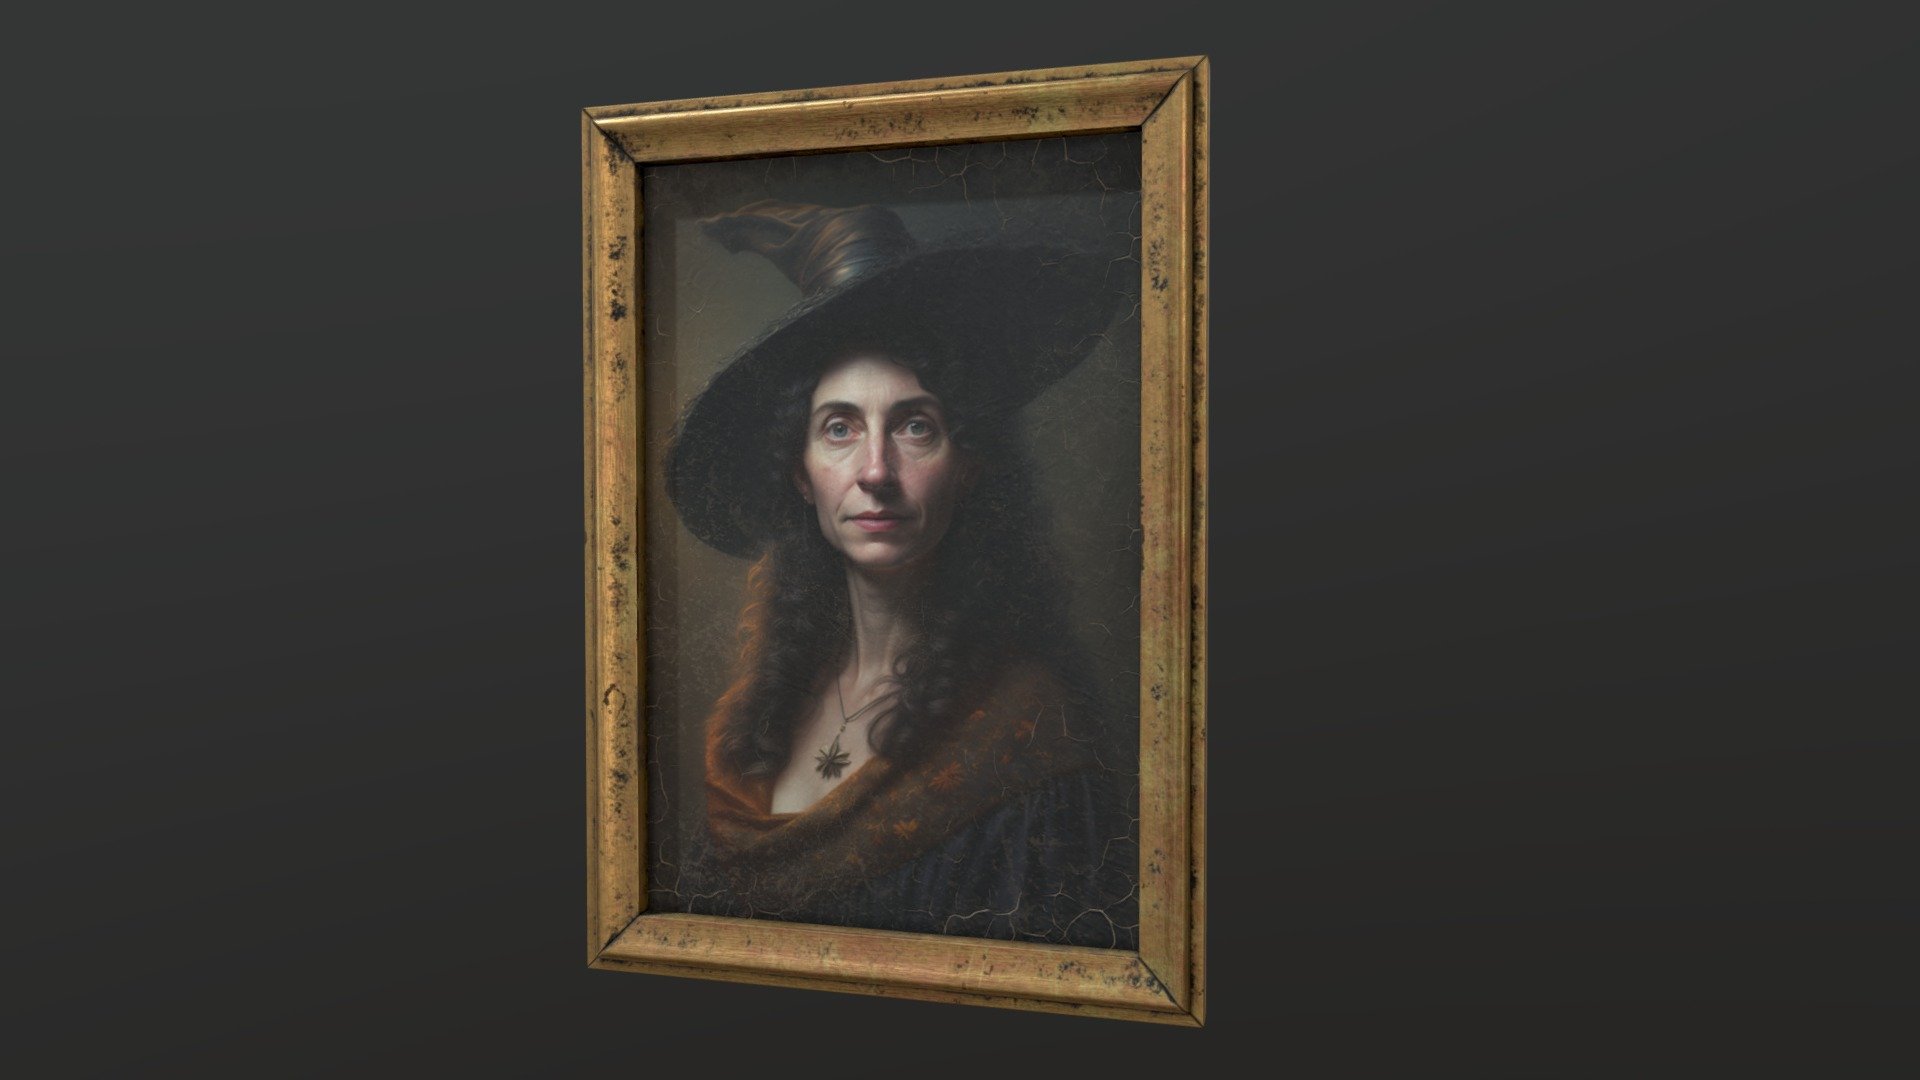 I've made a collection of fantasy portraits, you can find all the models in: skfb.ly/oESqW

This one is an old oil painting portrait of a witch.

4K maps: Base Color, Normal (OpenGL), Roughness, Metallic and Ambient Occlusion.
Format: .fbx - Old Portrait of Witch - Download Free 3D model by Anskar 3d model